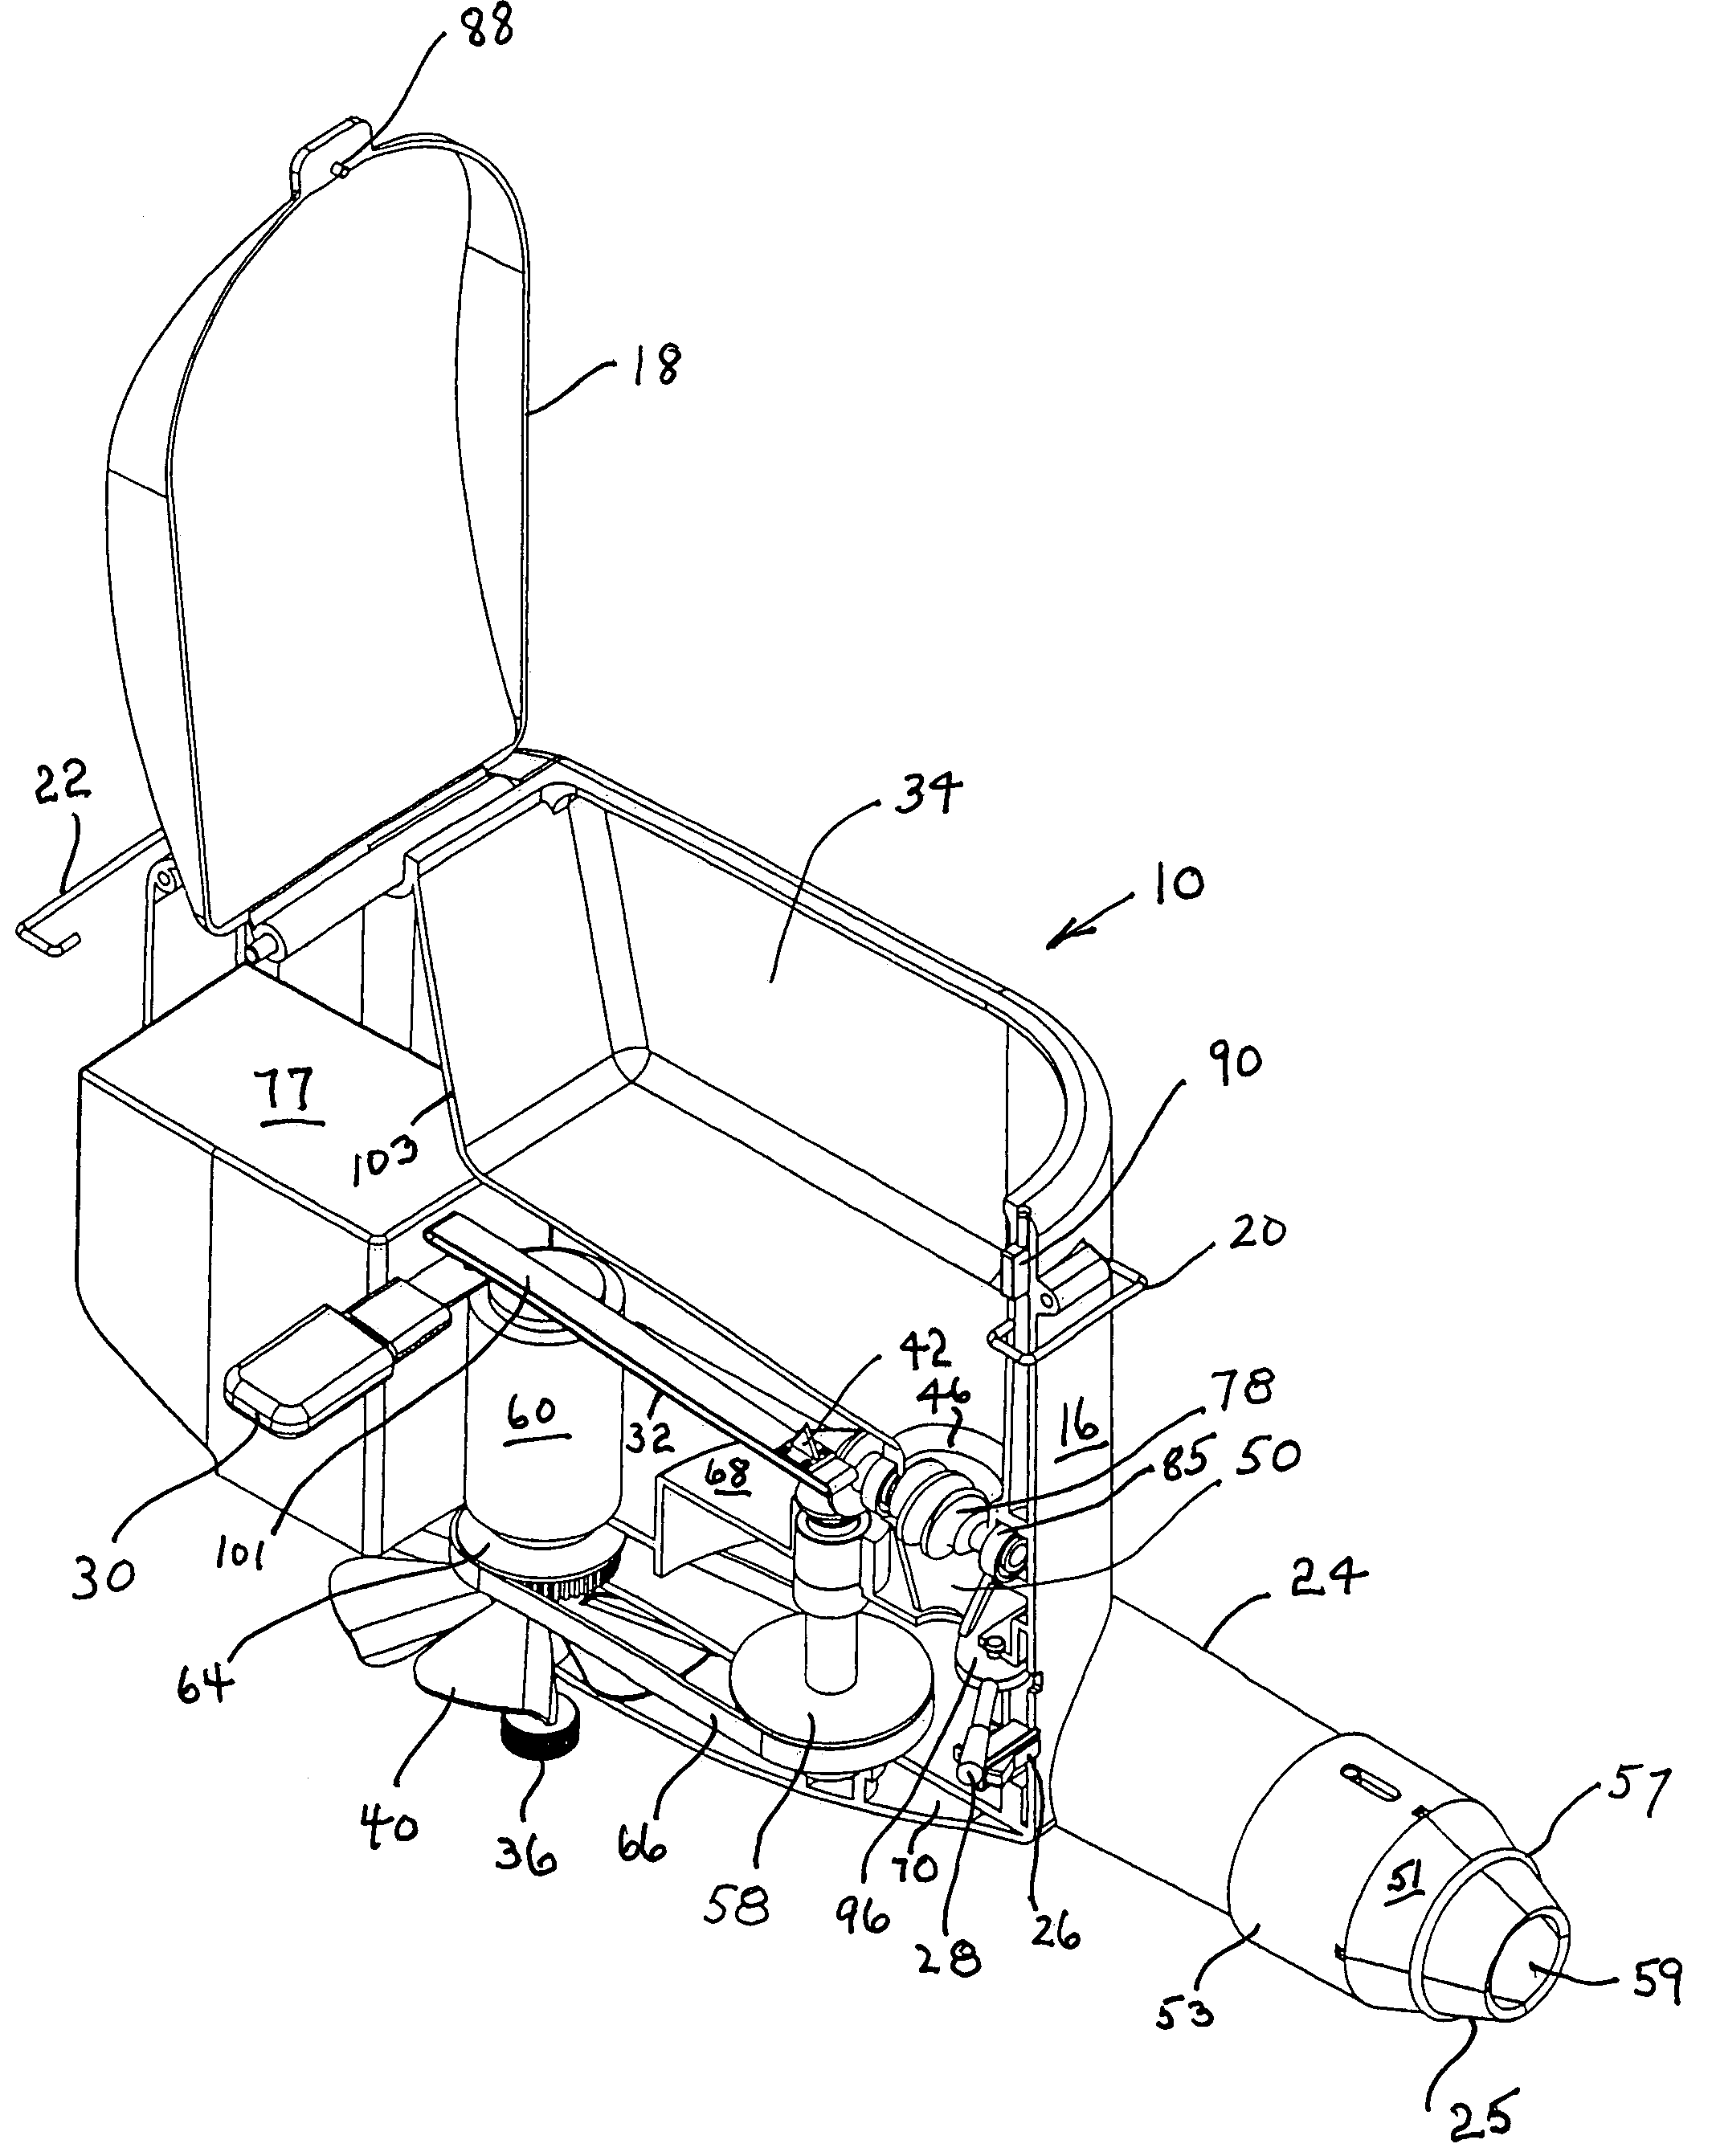 Portable particle spreader/blower